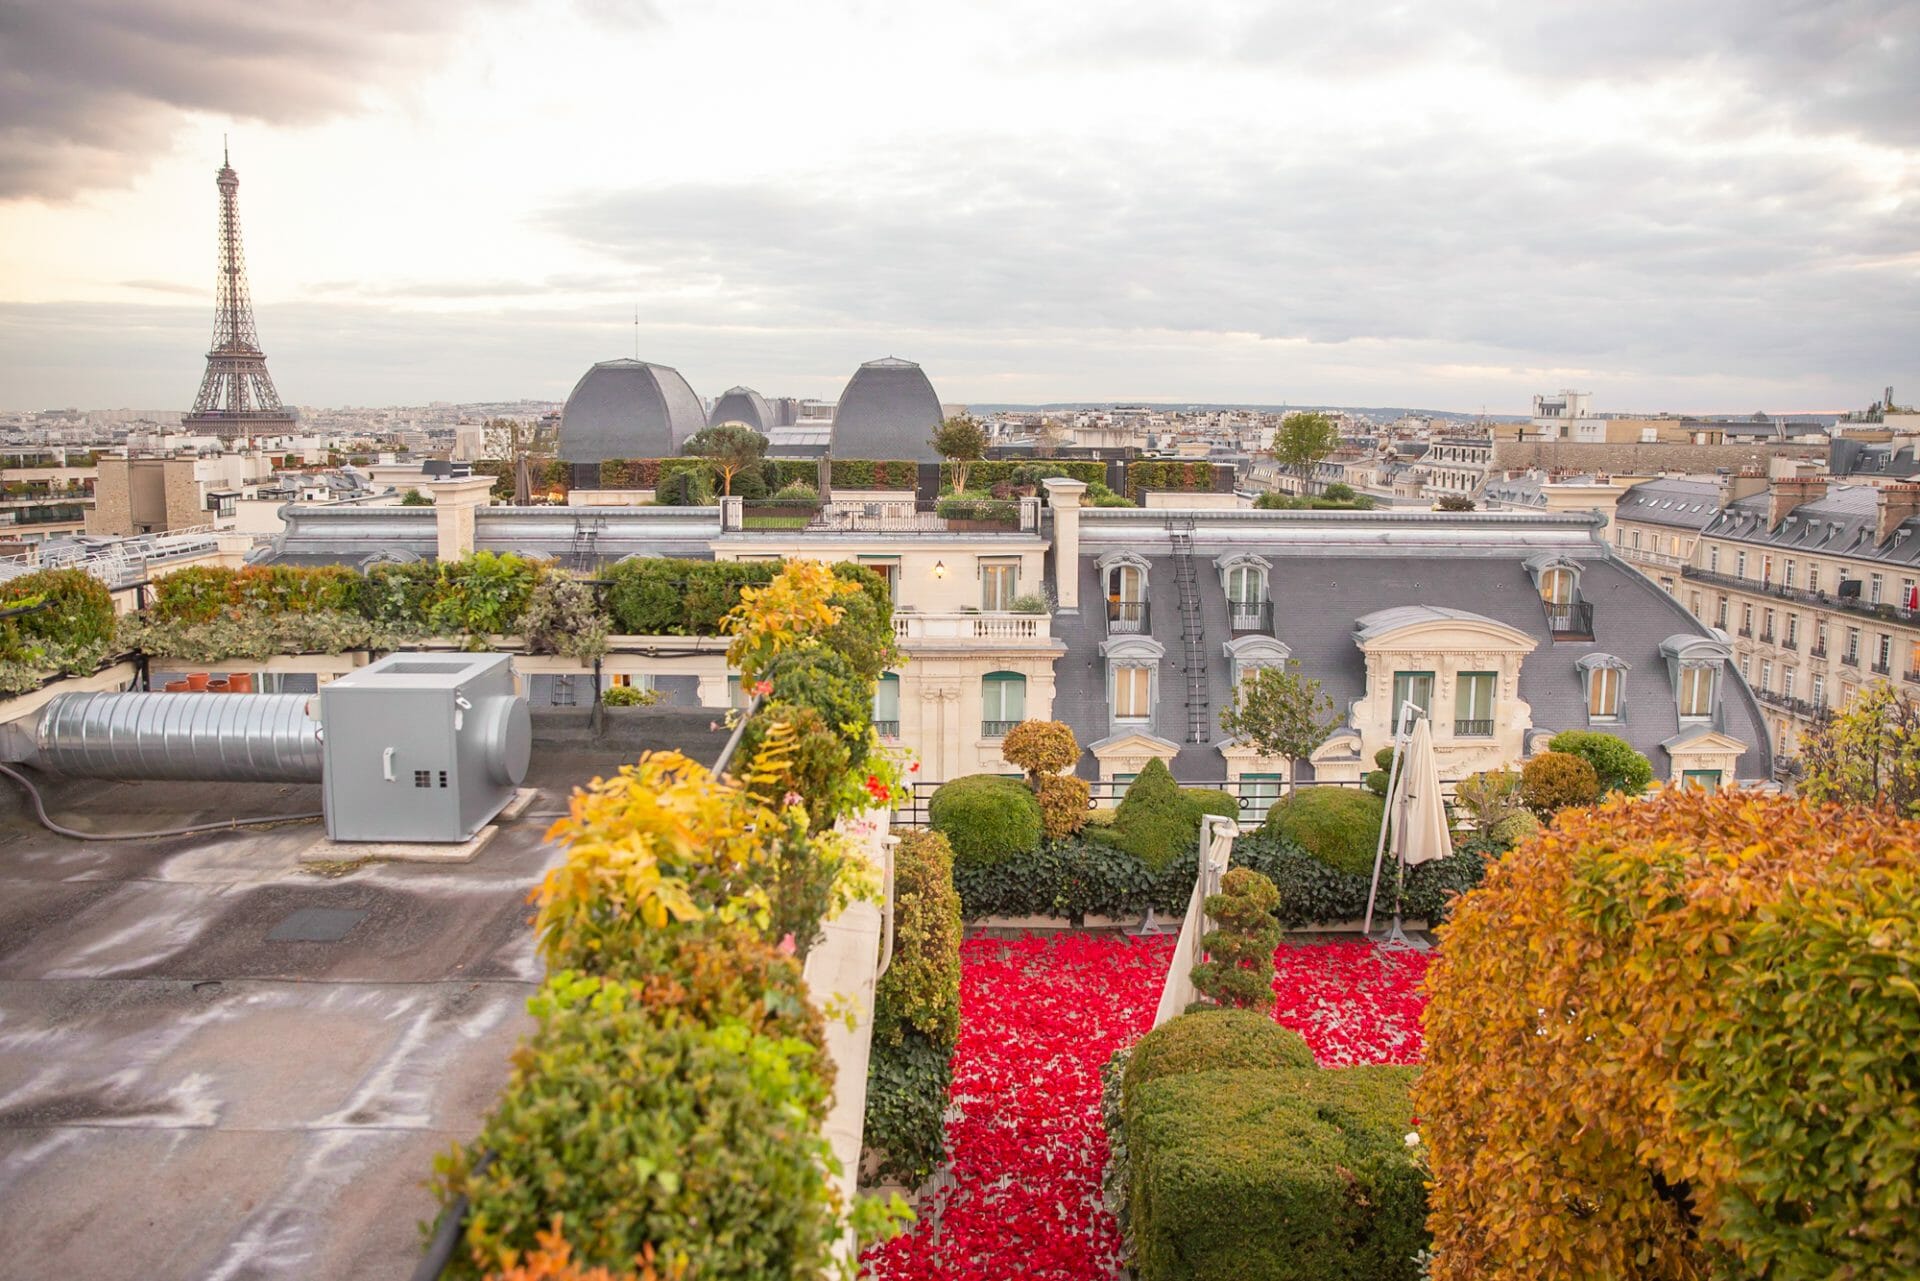 Rooftop terrace Paris proposal with thousands of red rose petals